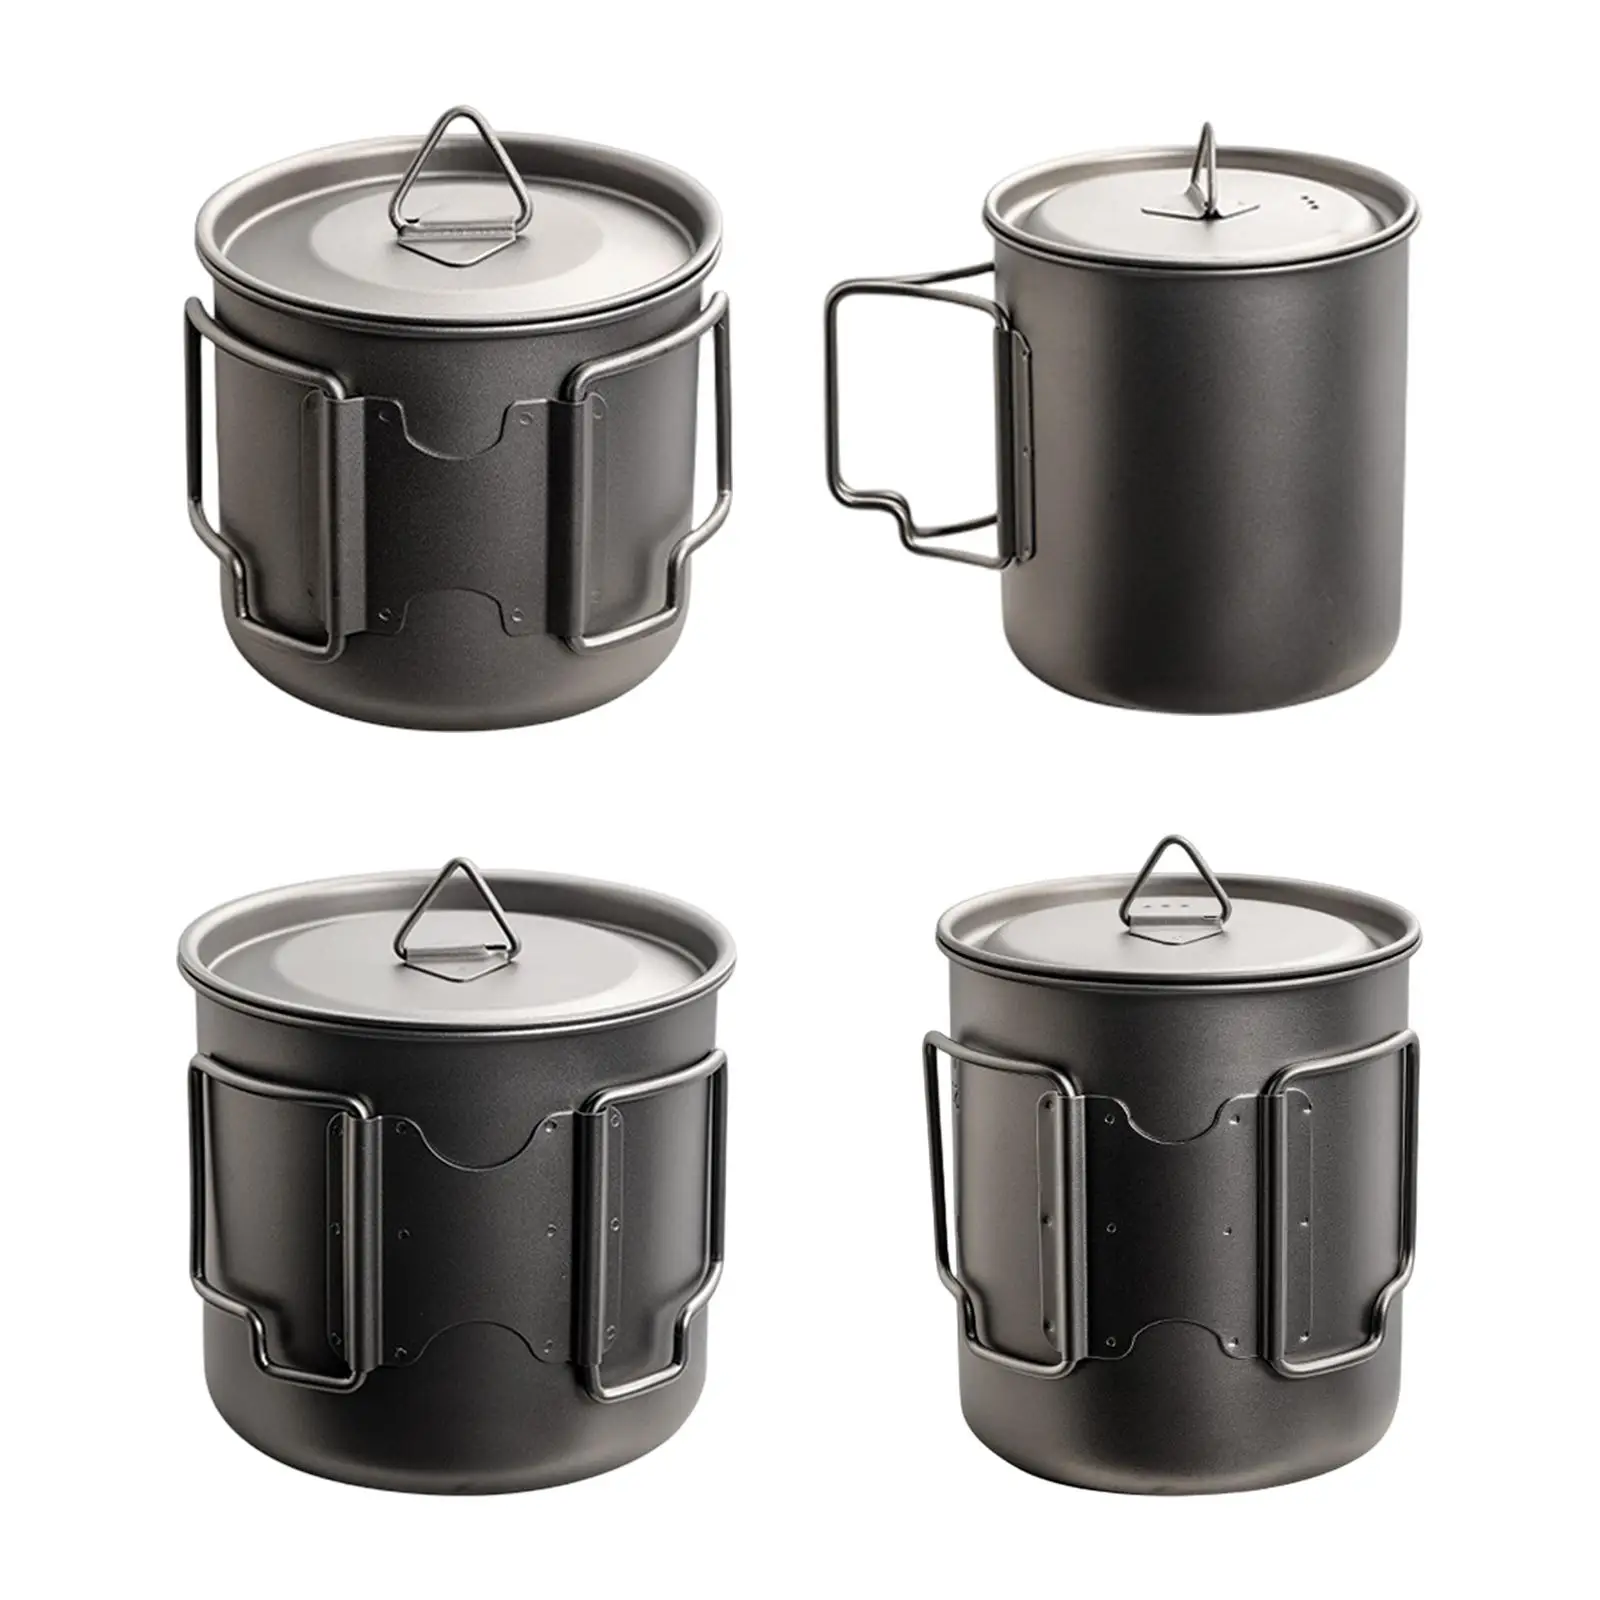 Titanium Water Cup Cookware Camping Tea Coffee Mug for Hiking Outdoor Picnic